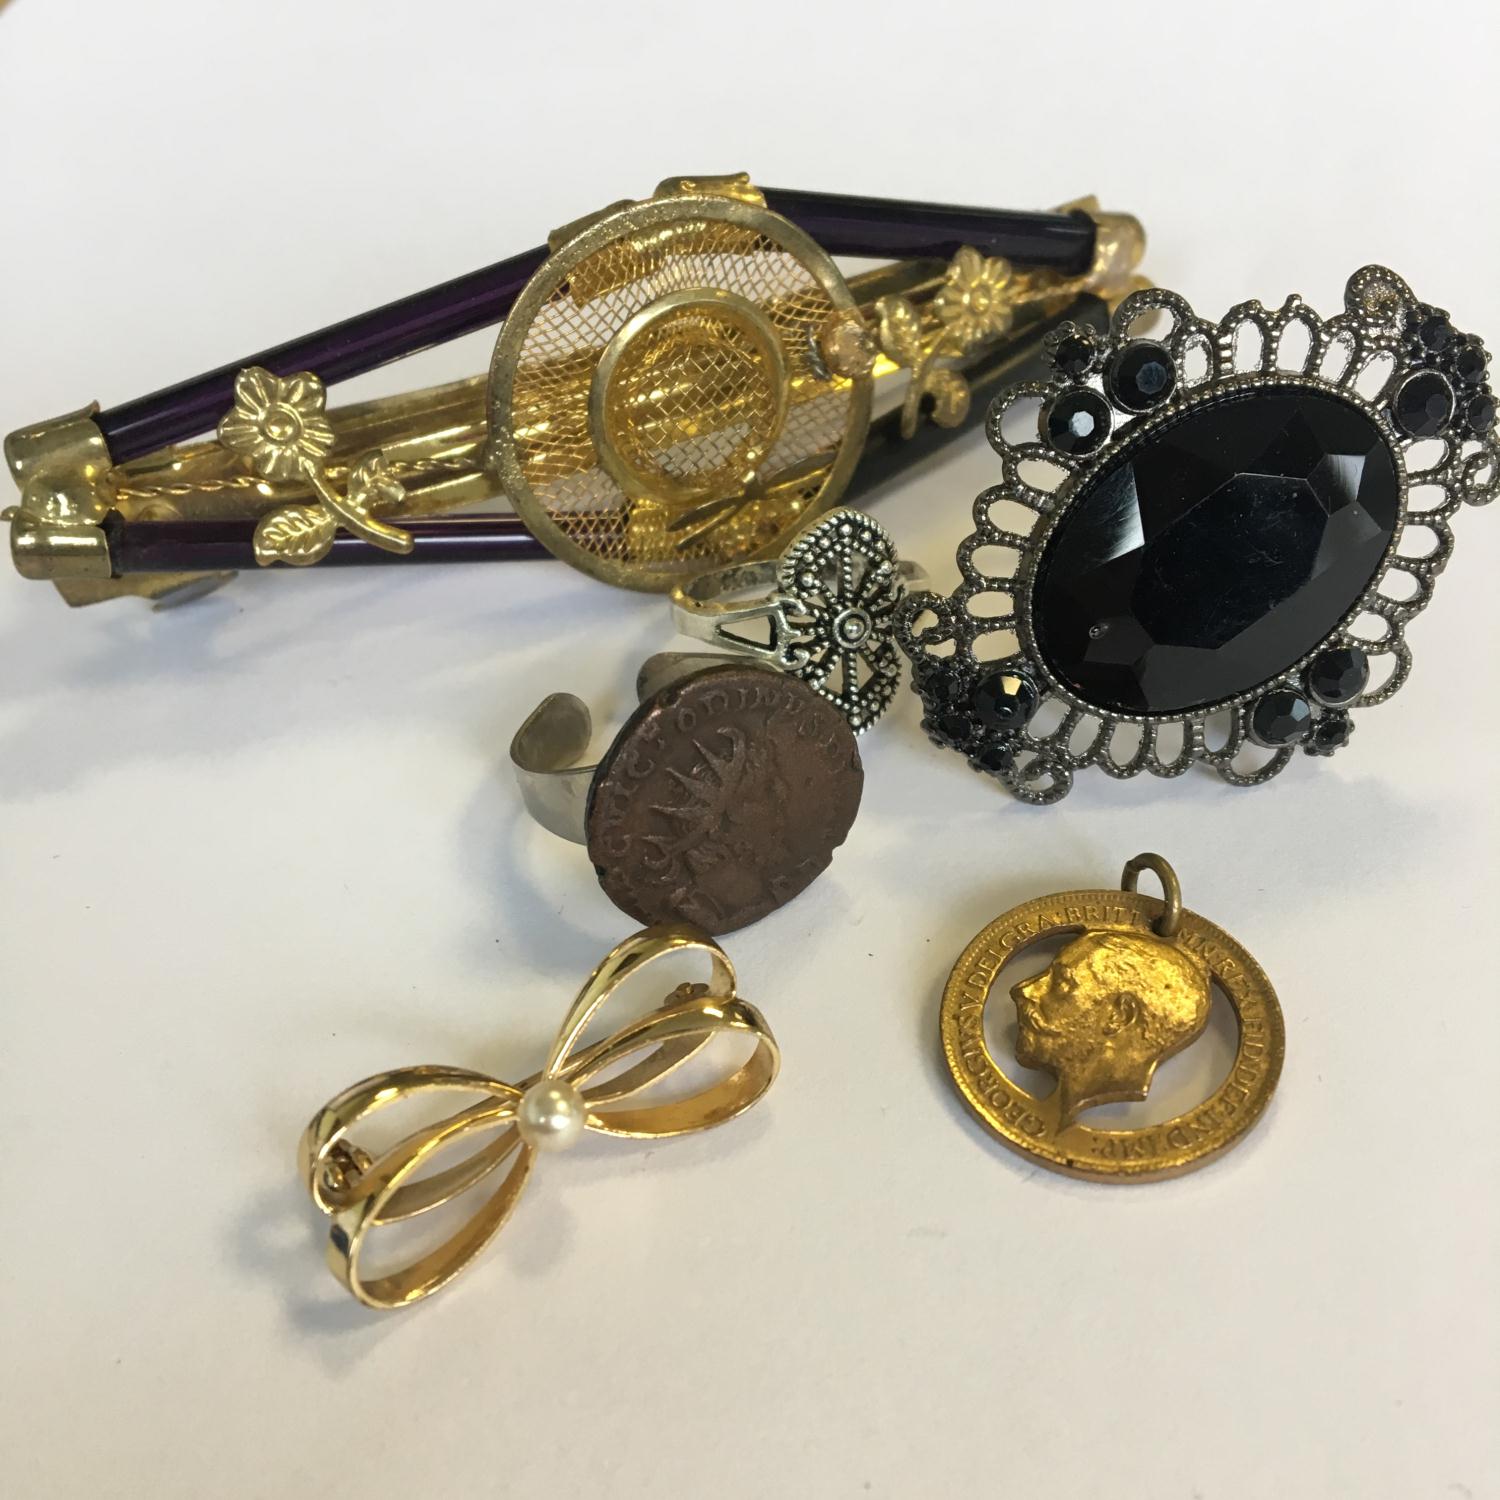 Assorted dress jewellery items to include a Roman coin ring and a 1911 farthing coin made into a